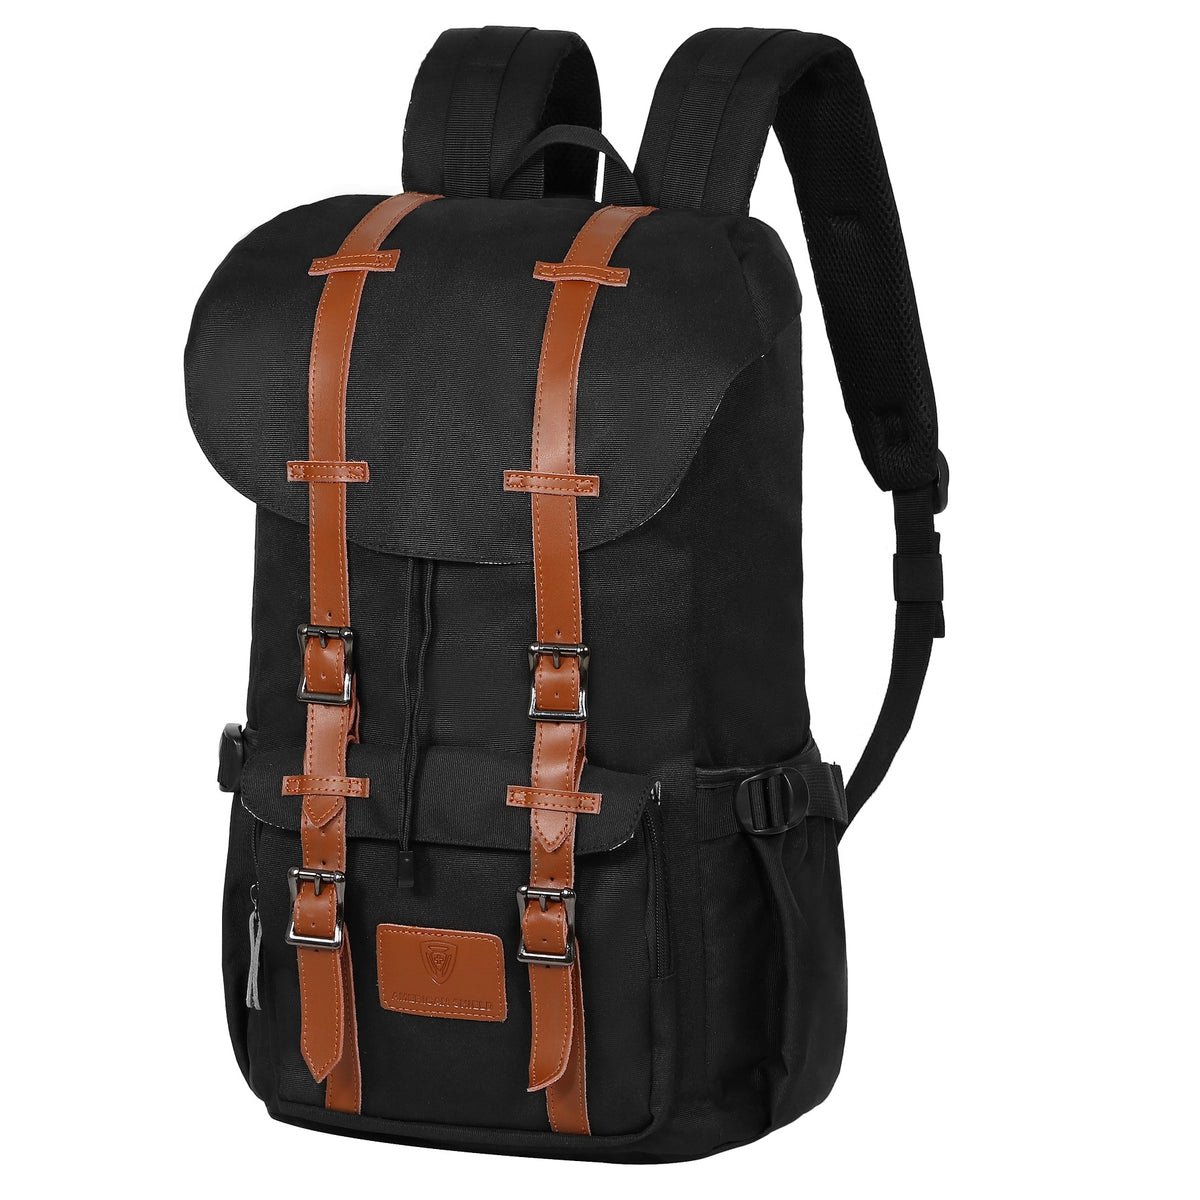 American Shield - Fashion Style Backpacks (Official website)